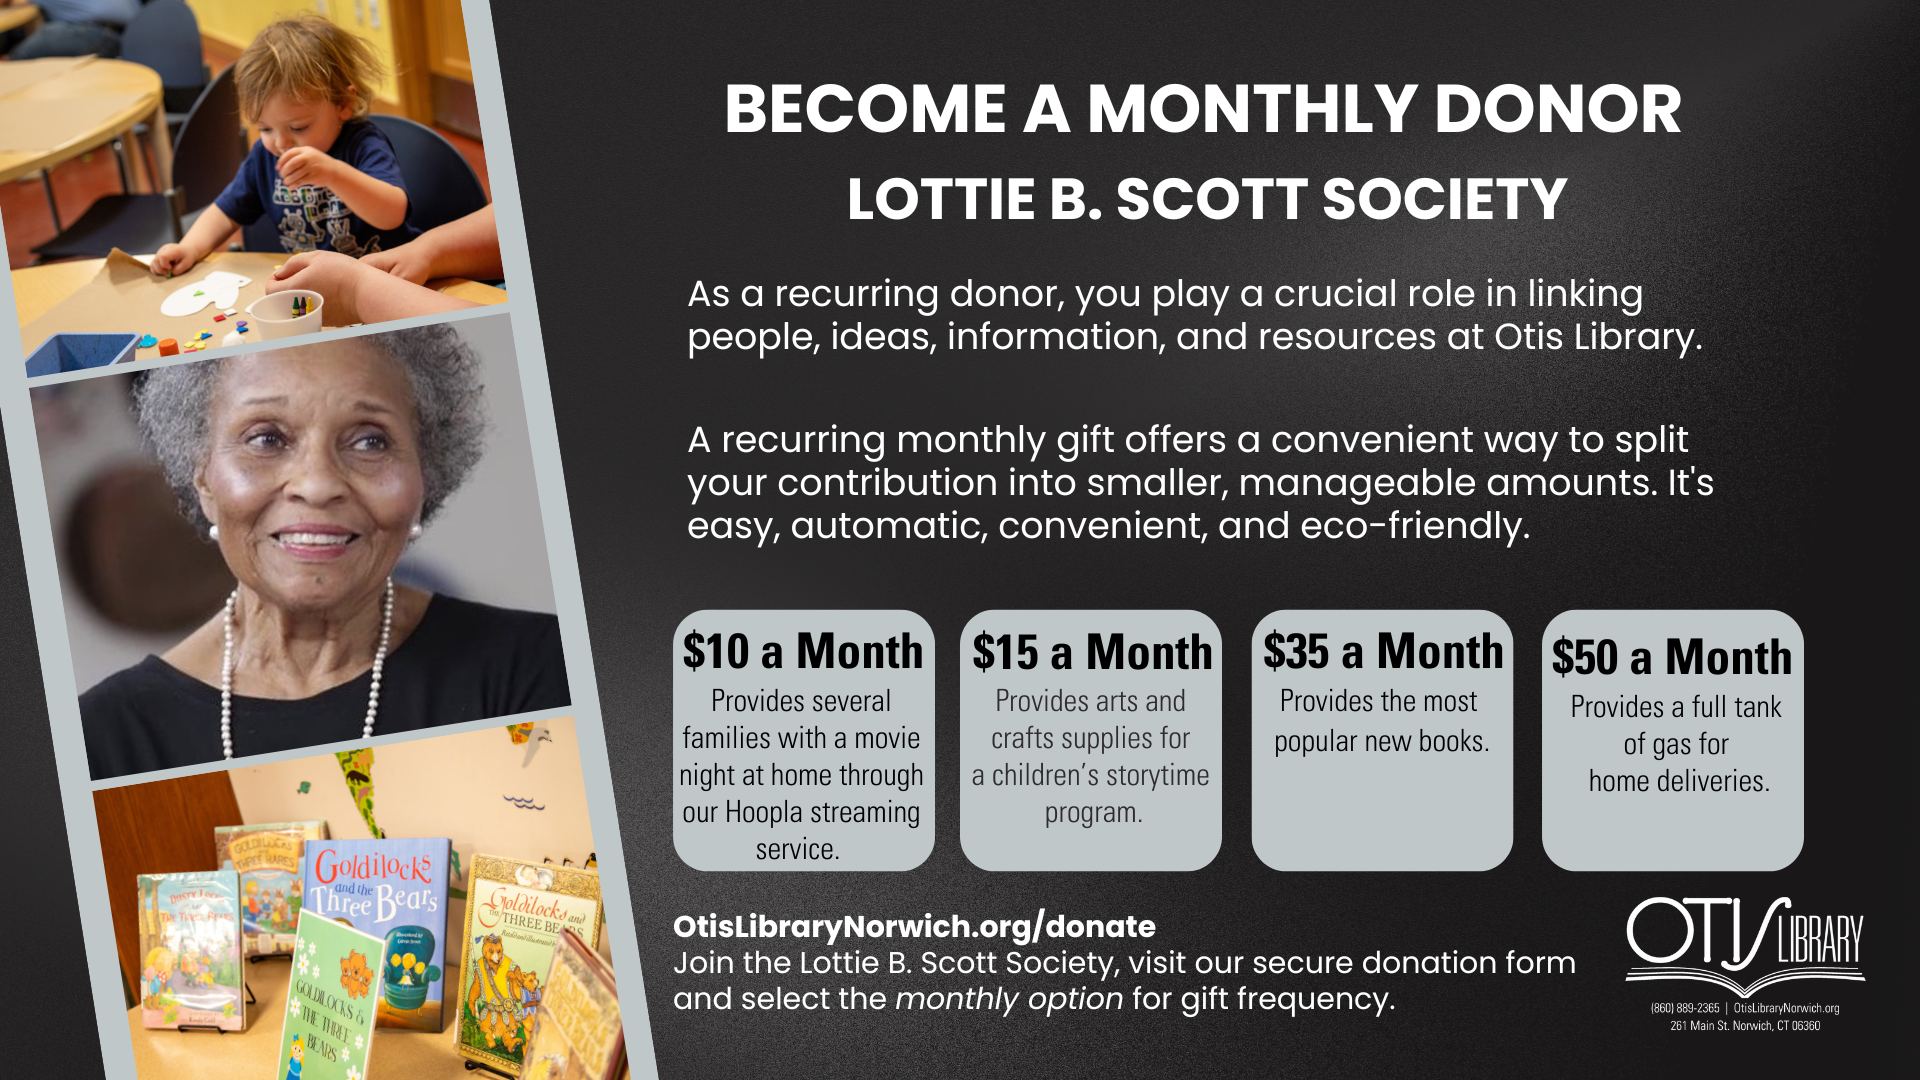 Become a monthly donor and join the Lottie B. Scott Society. As a recurring donor, you play a crucial role in linking people, ideas, information, and resources at Otis Library. A recurring monthly gift offers a convenient way to split your contribution into smaller, manageable amounts. It's easy, automatic, convenient, and eco-friendly. 

What does your donation do? 

$10 a month provides several families with a movie night at home through our Hoopla streaming service. 

$15 a month provides arts and crafts supplies for a children's storytime program. 

$35 a month provides the most popular new books.

$50 a month provides a full tank of gas for home deliveries. 